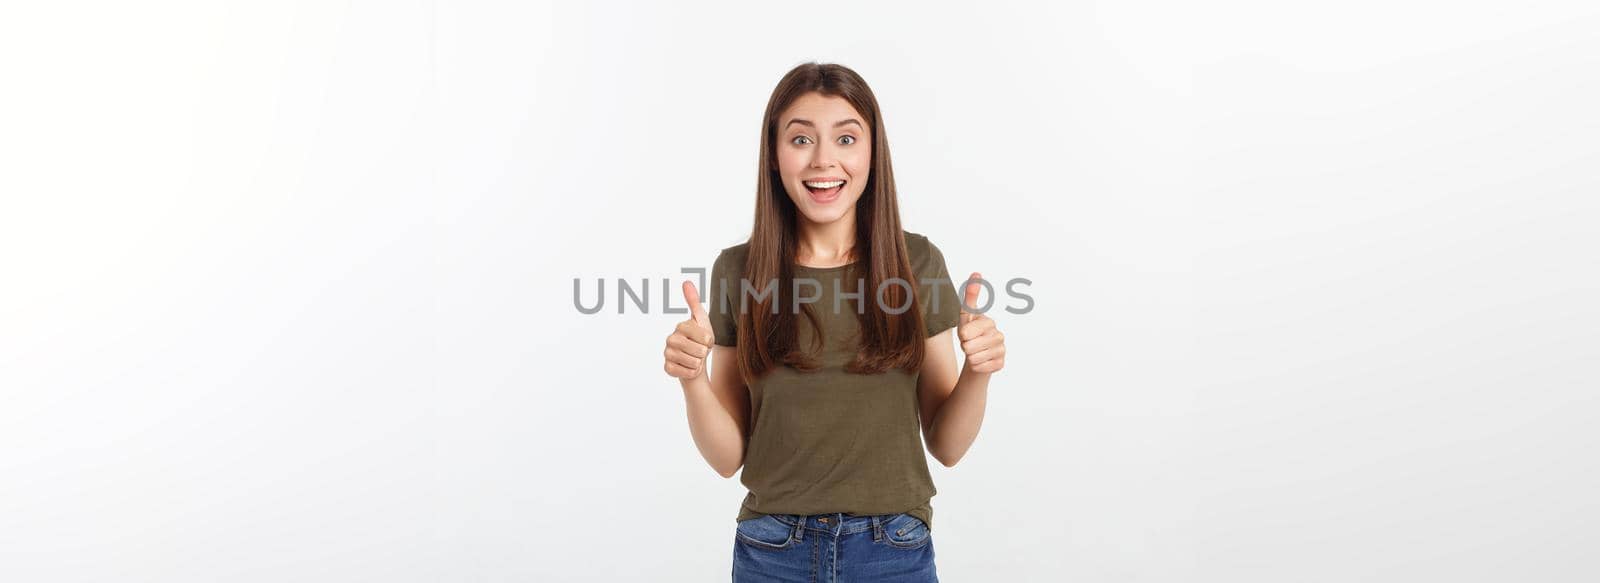 Closeup portrait of a beautiful young woman showing thumbs up sign. Isolate over white background